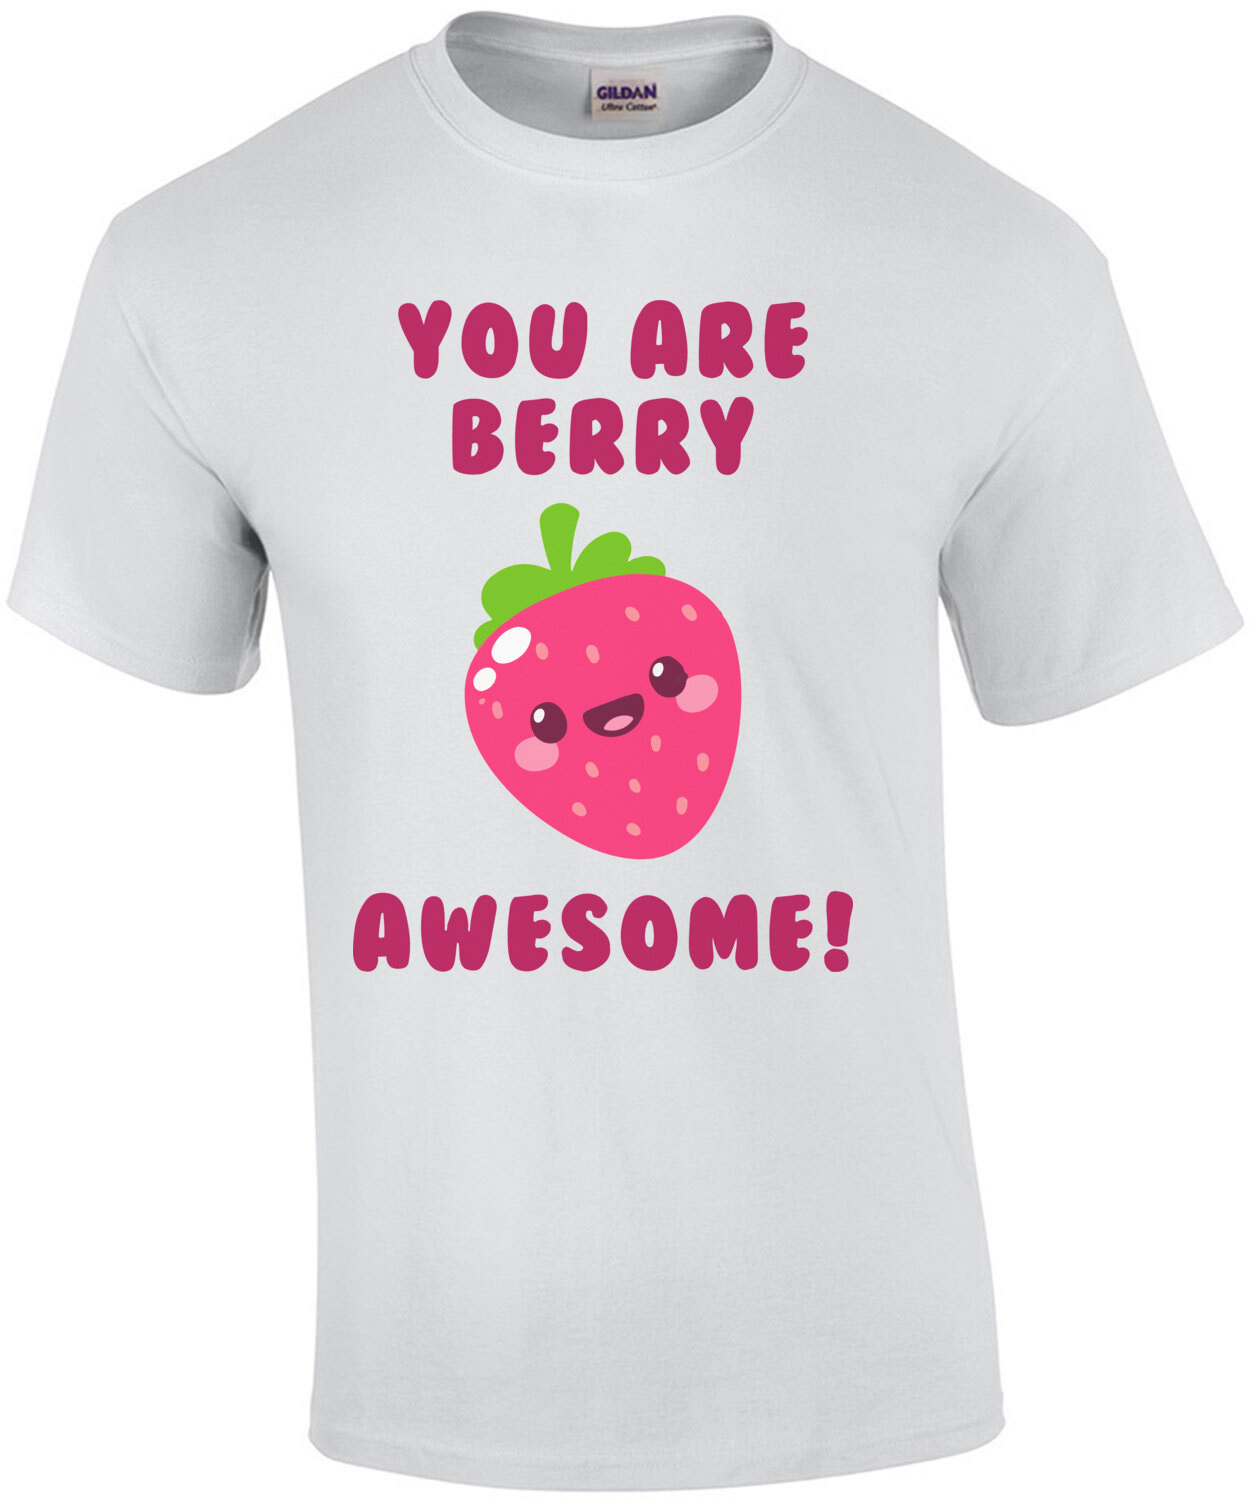 You are berry awesome - cute t-shirt